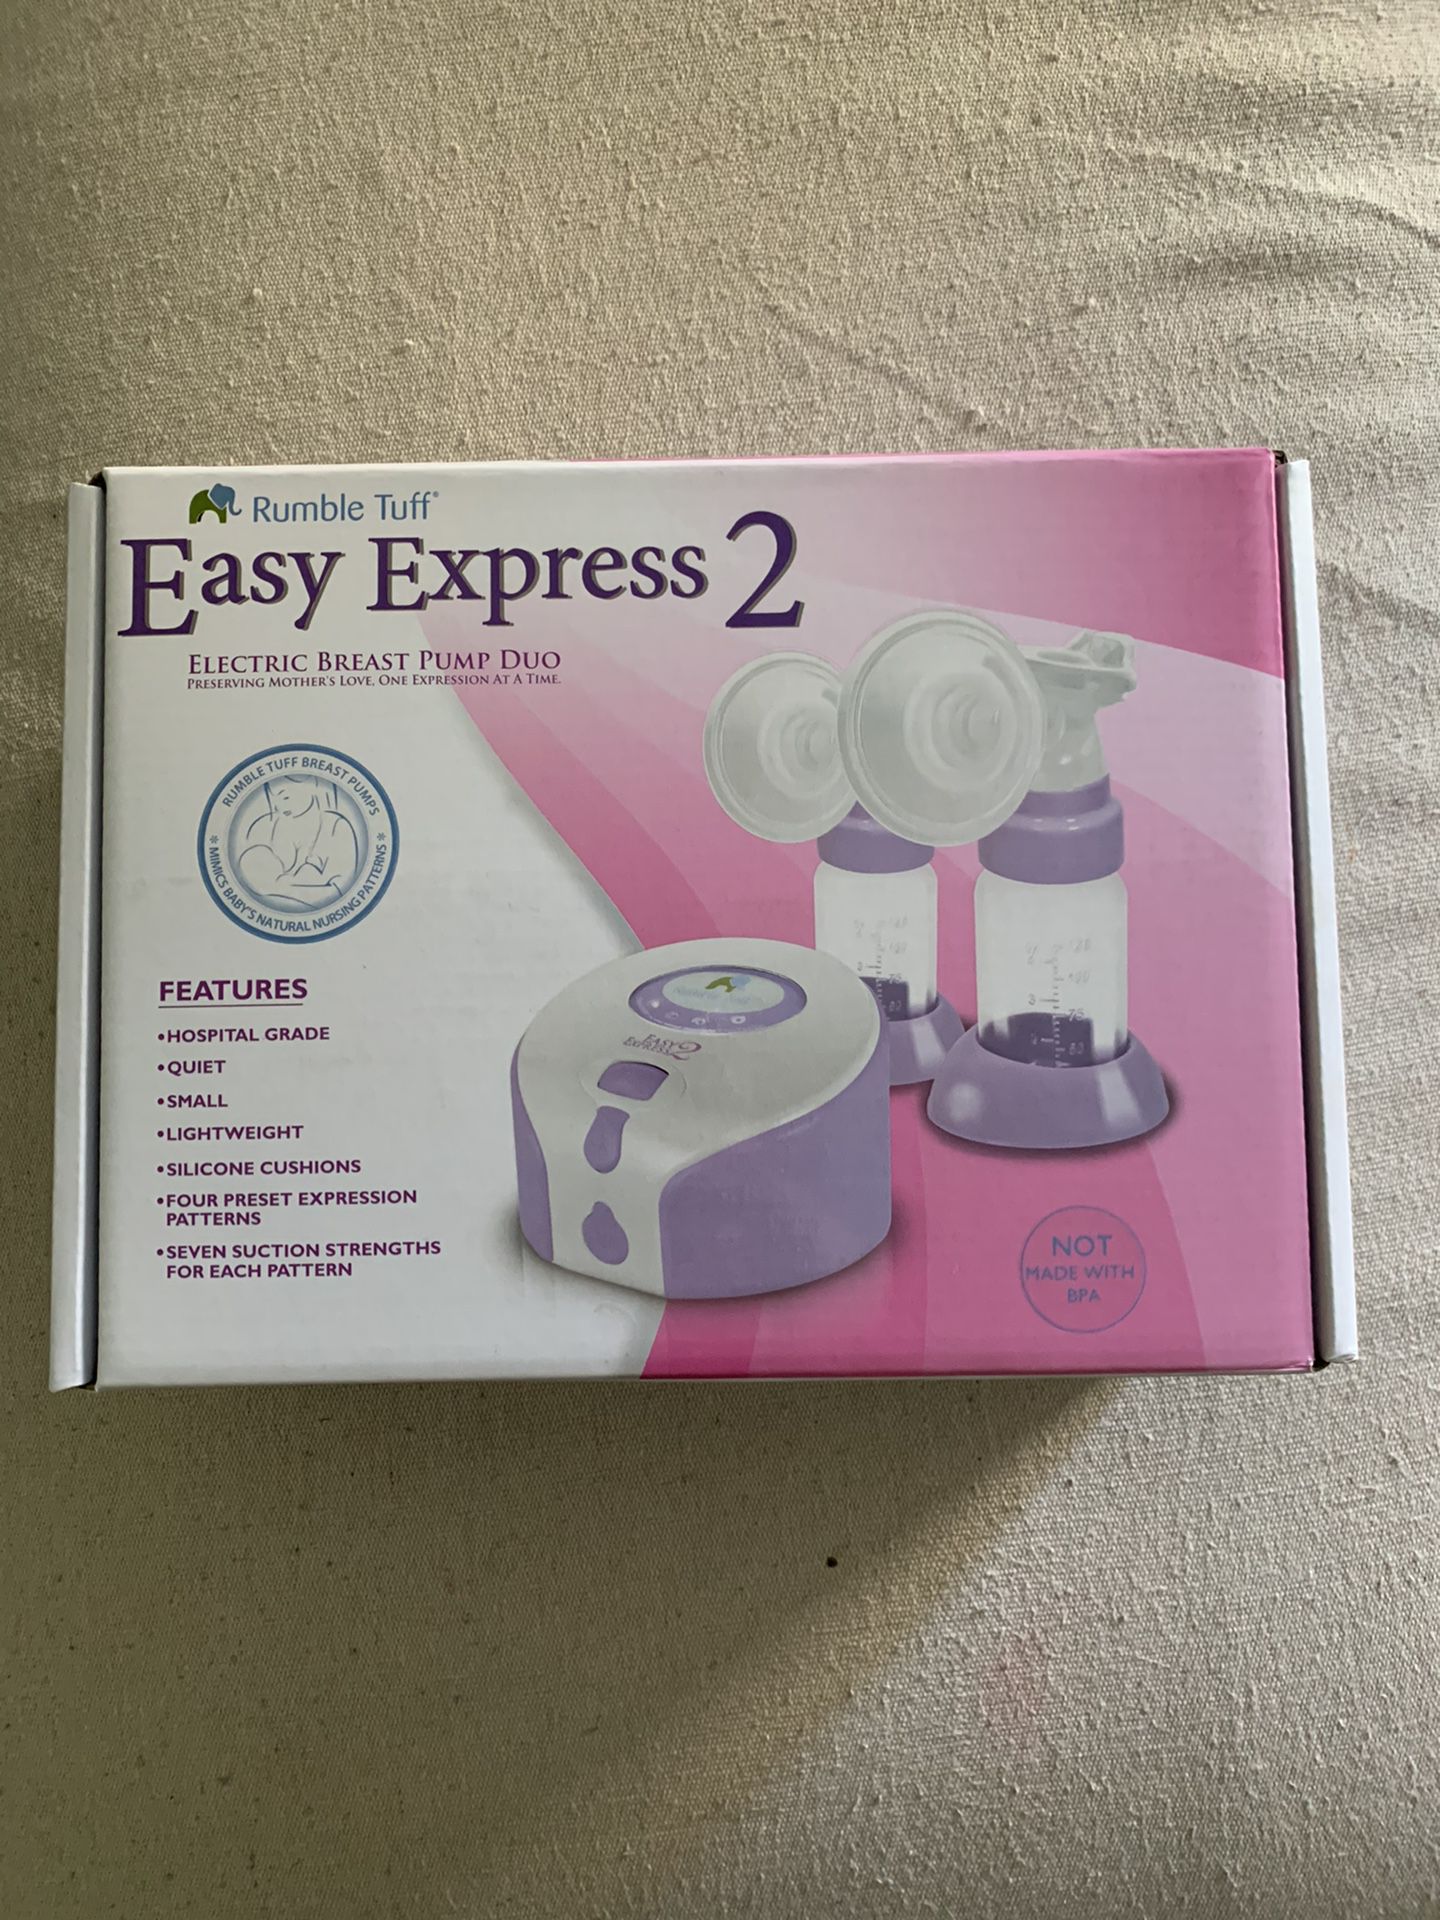 Easy Express 2